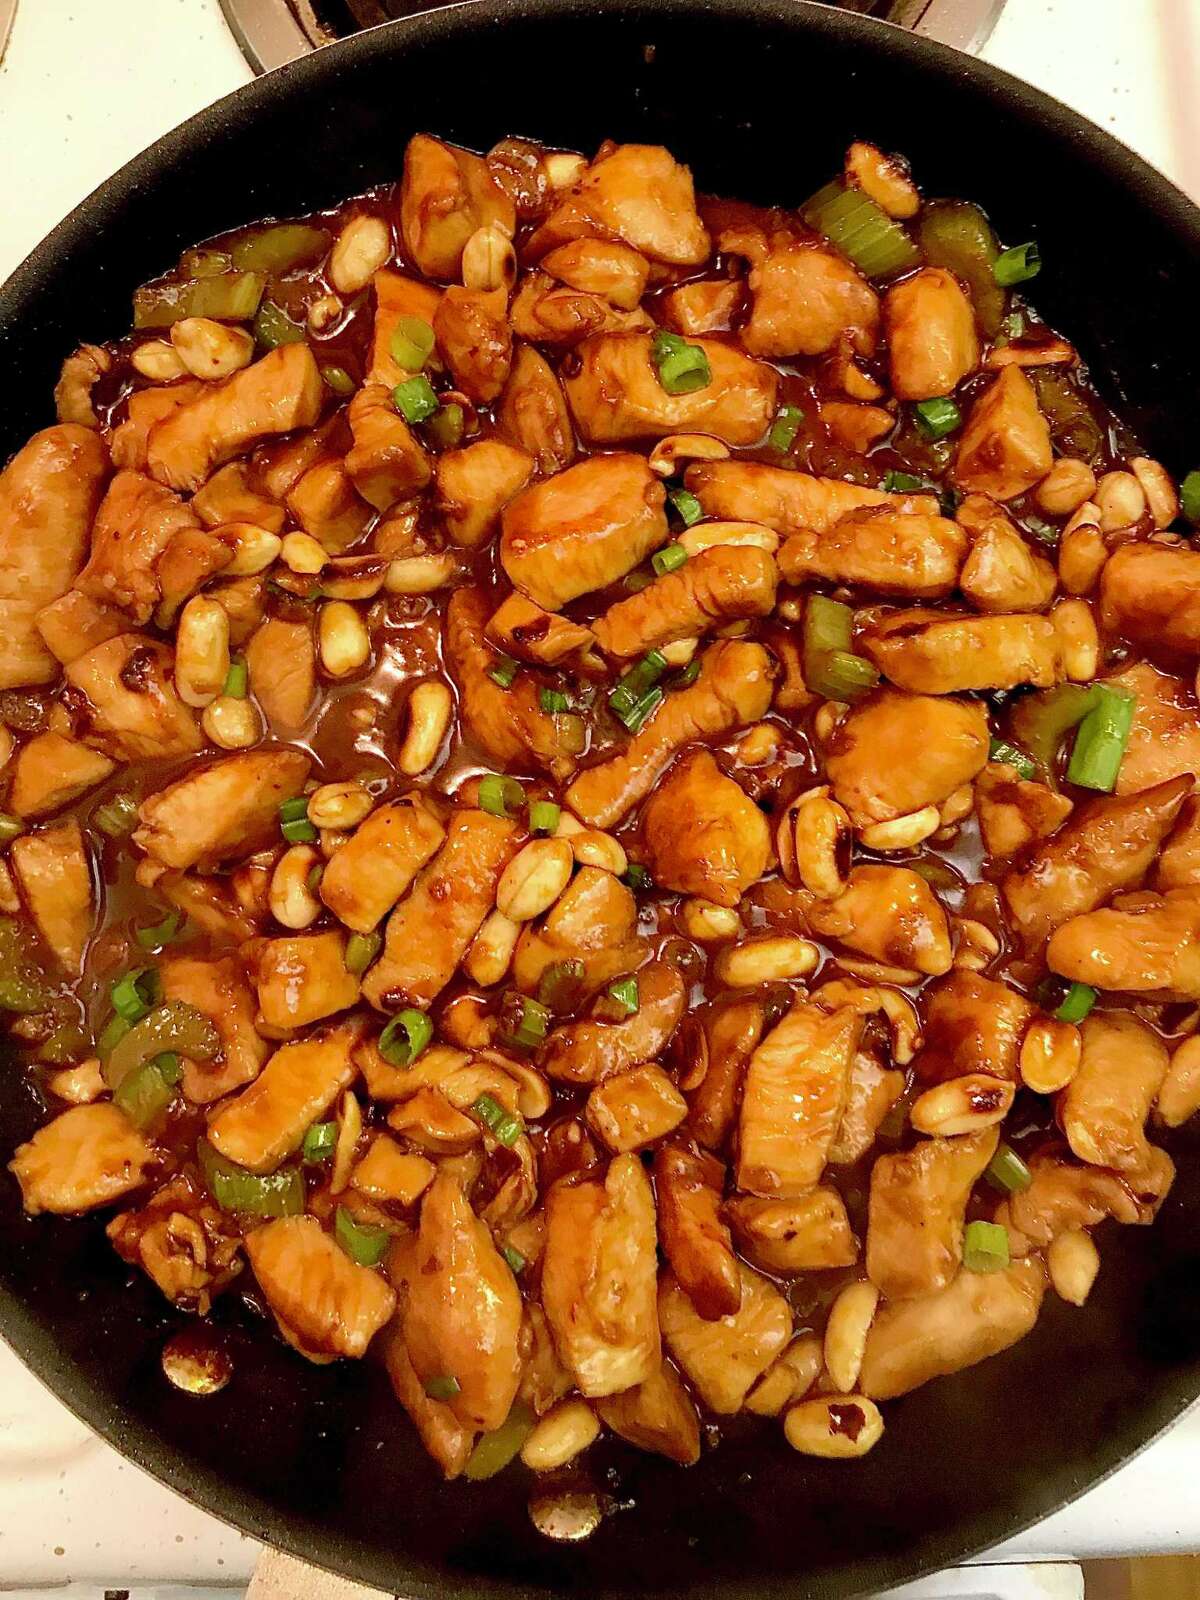 Chicken and peanuts in a sticky hoisin sauce.